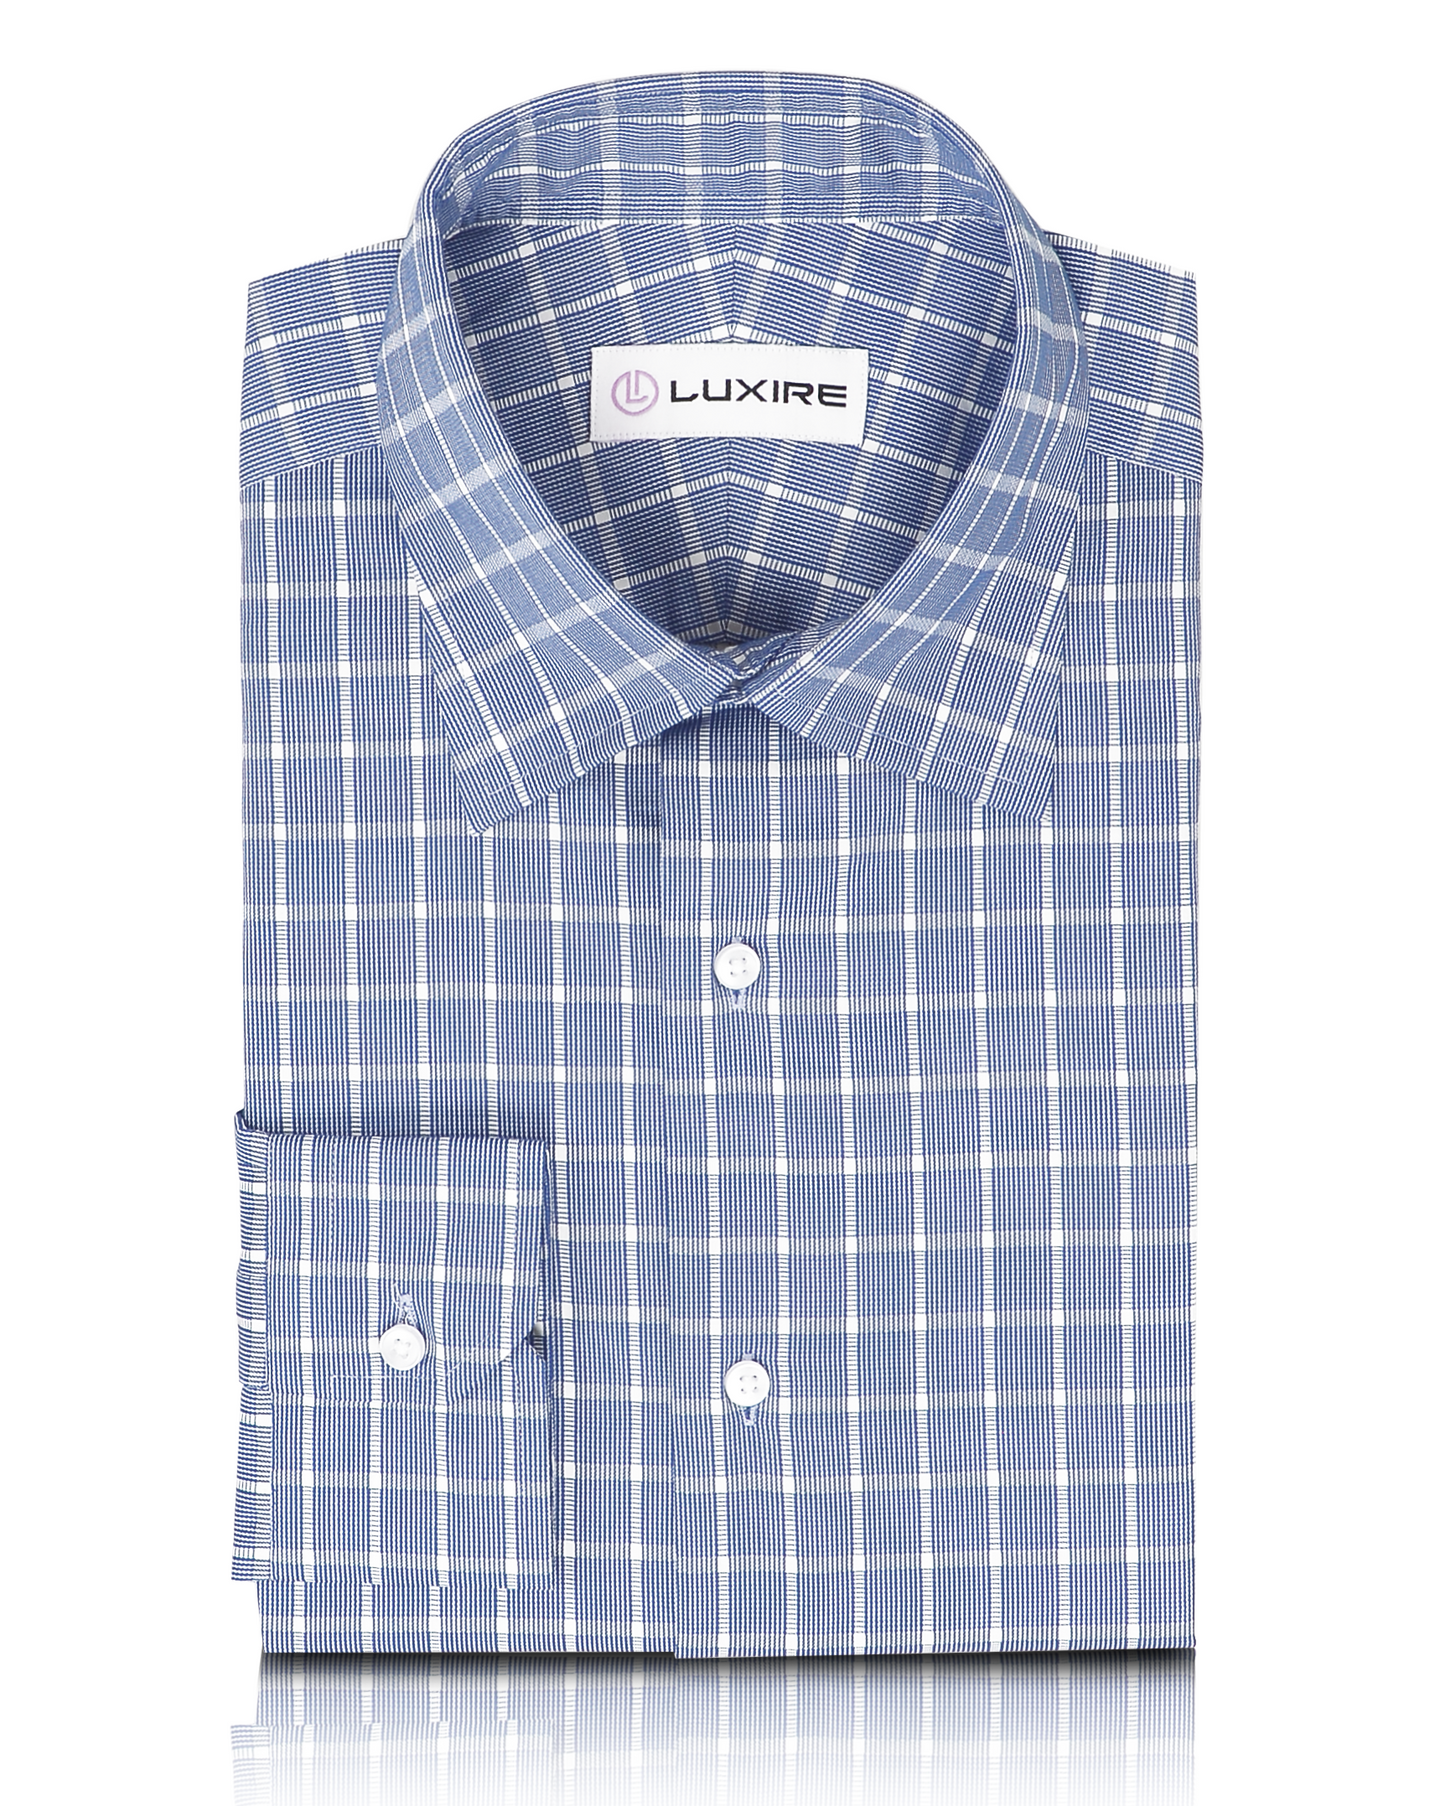 Front view of custom check shirts for men by Luxire in navy blue white grid